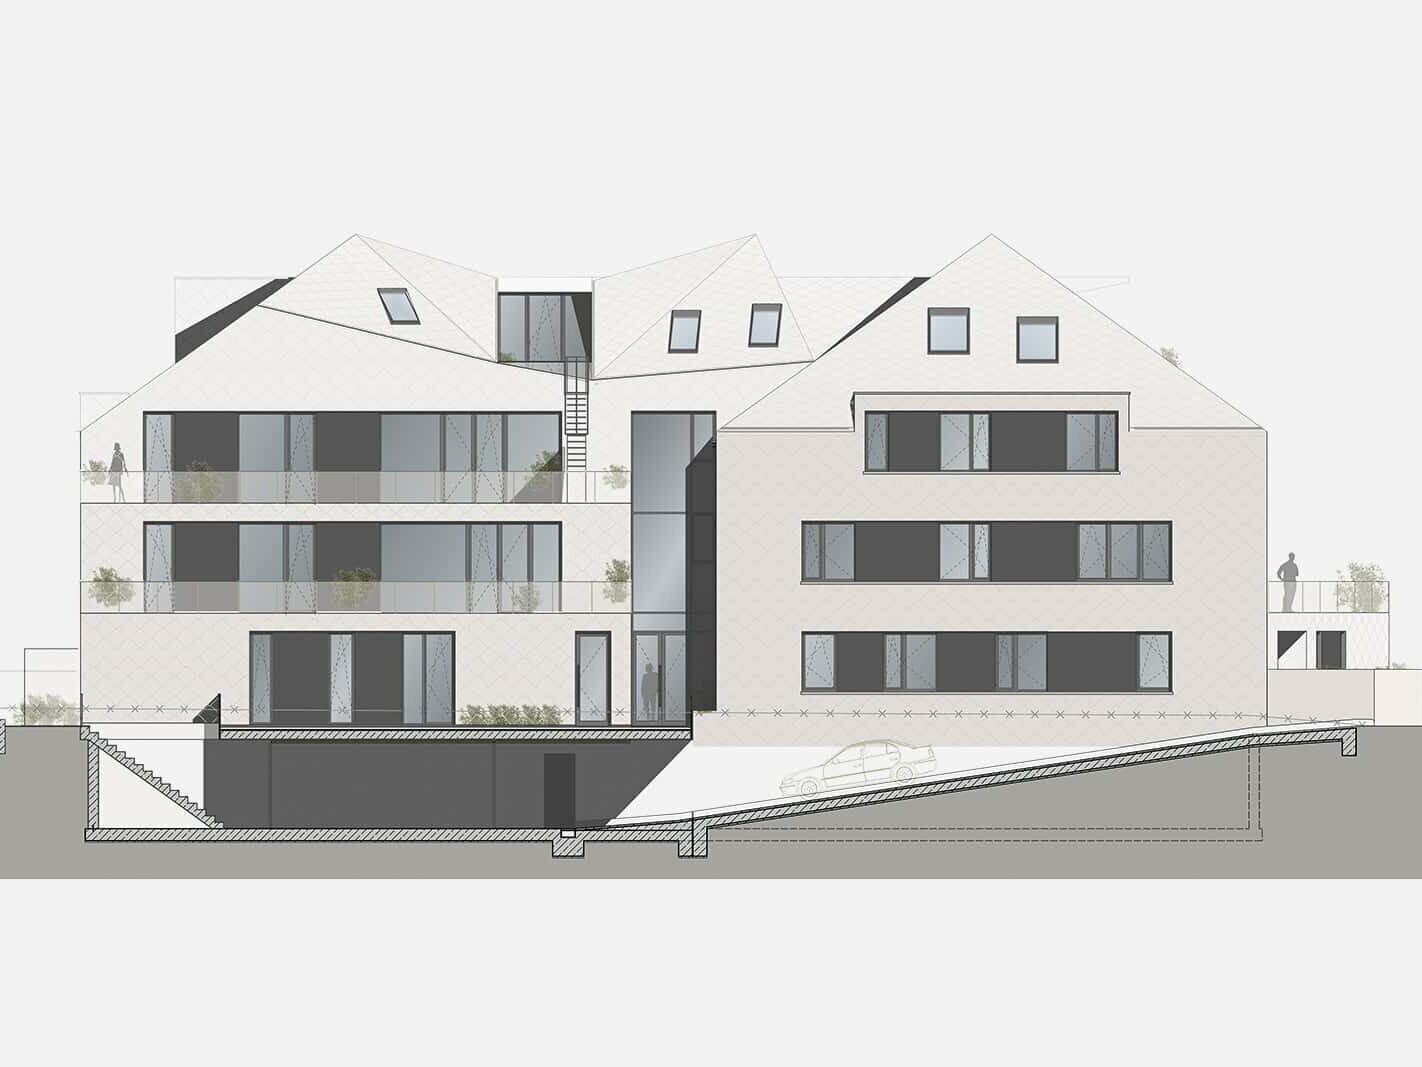 The architectßs plan shows the north side of the apartment building